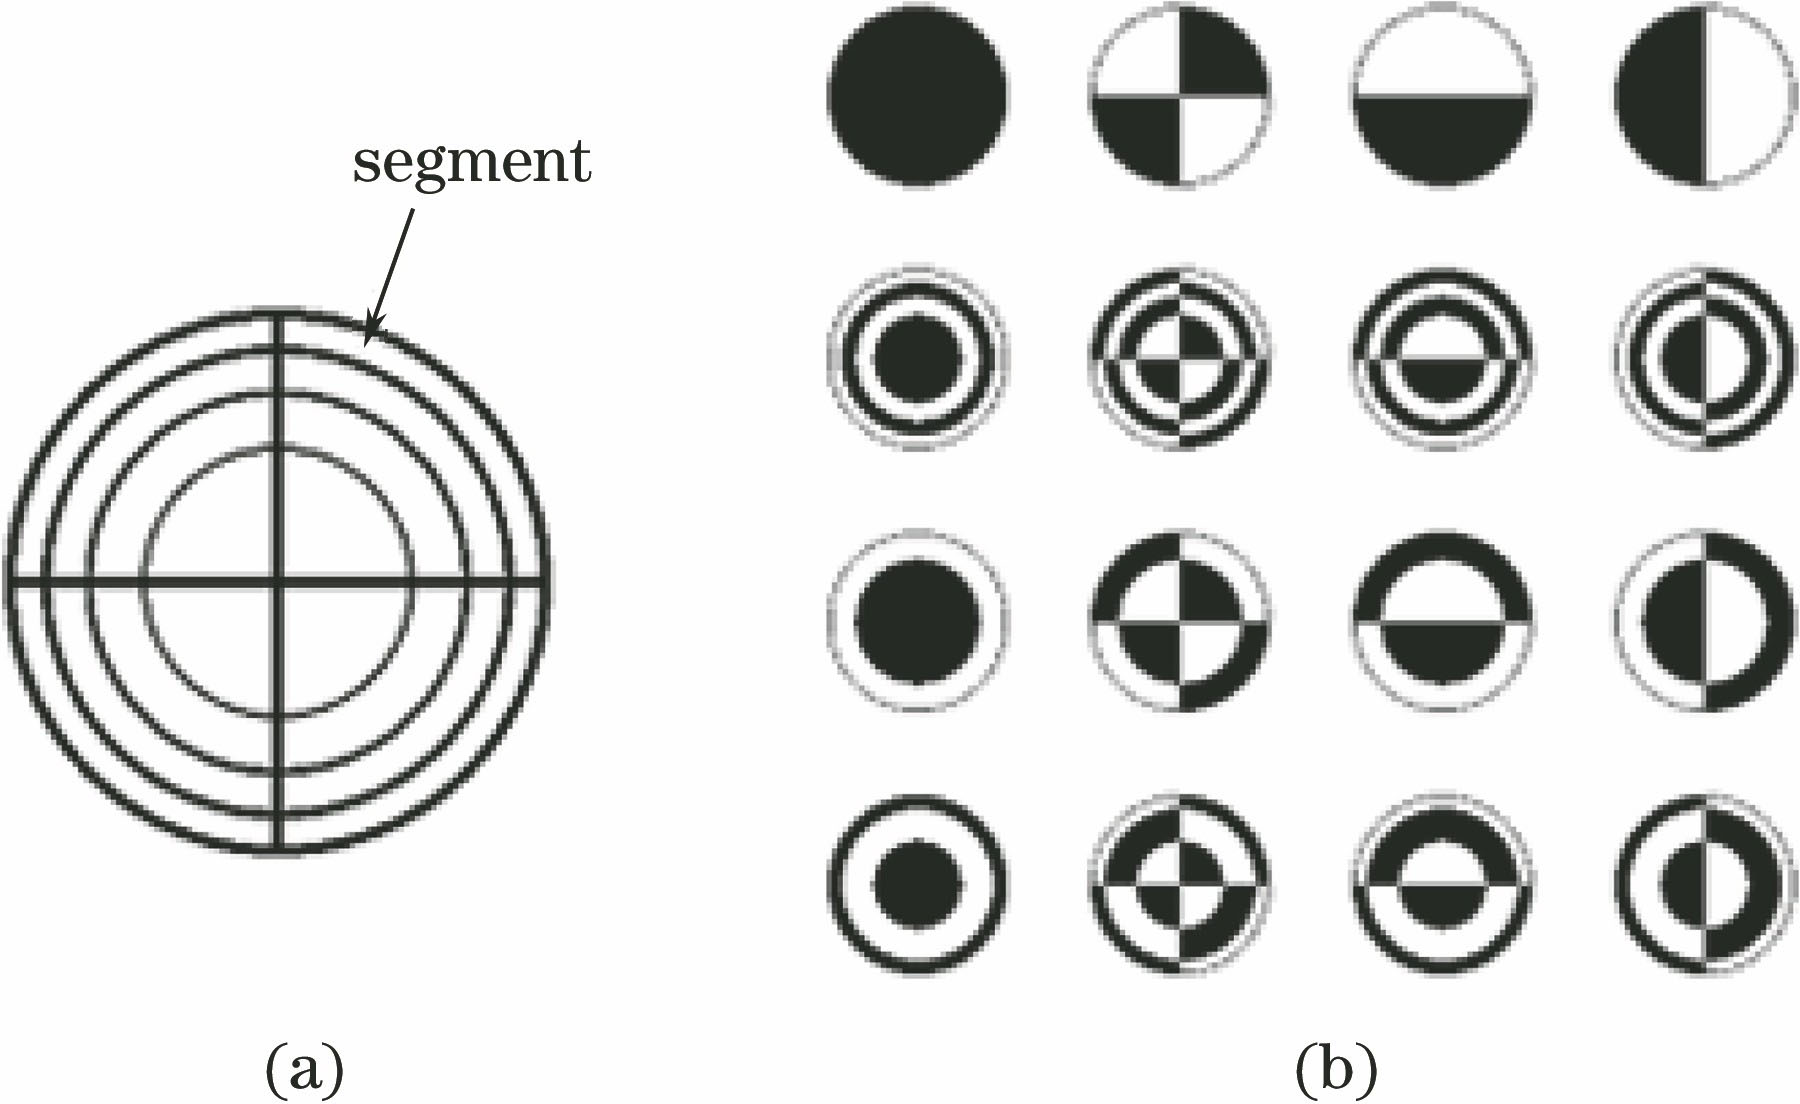 Walsh functions. (a) Segments formed by divided unit circle; (b) Walsh functions in polar coordinates (Black areas are assigned value of 1, white areas are assigned value of -1)